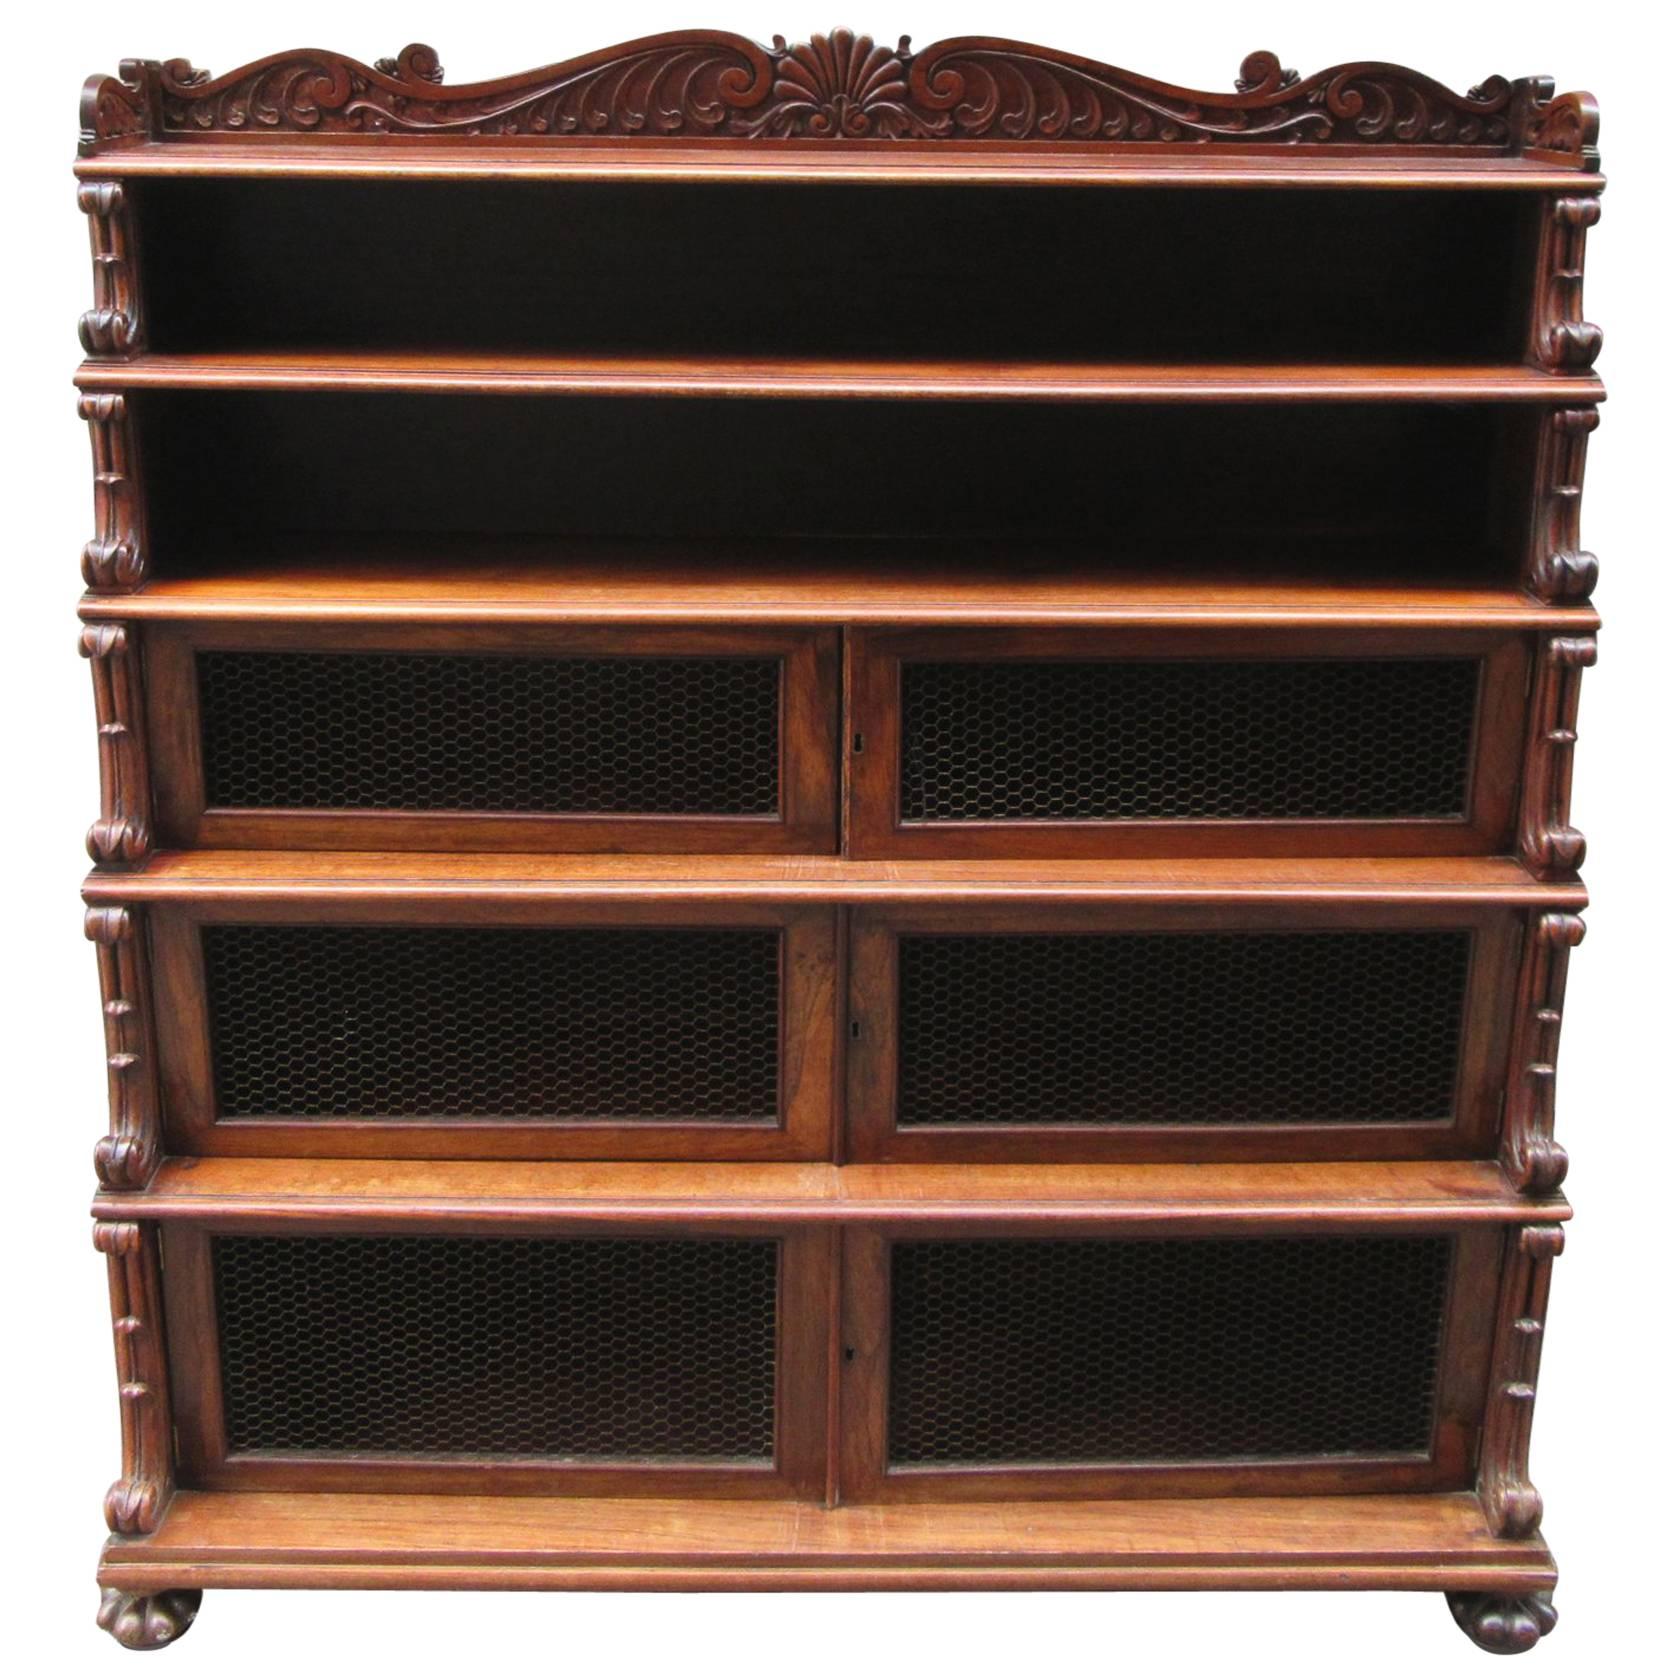 Early 19th Century West Indies Bajan Rosewood Tiered Bookcase with Shell Motif